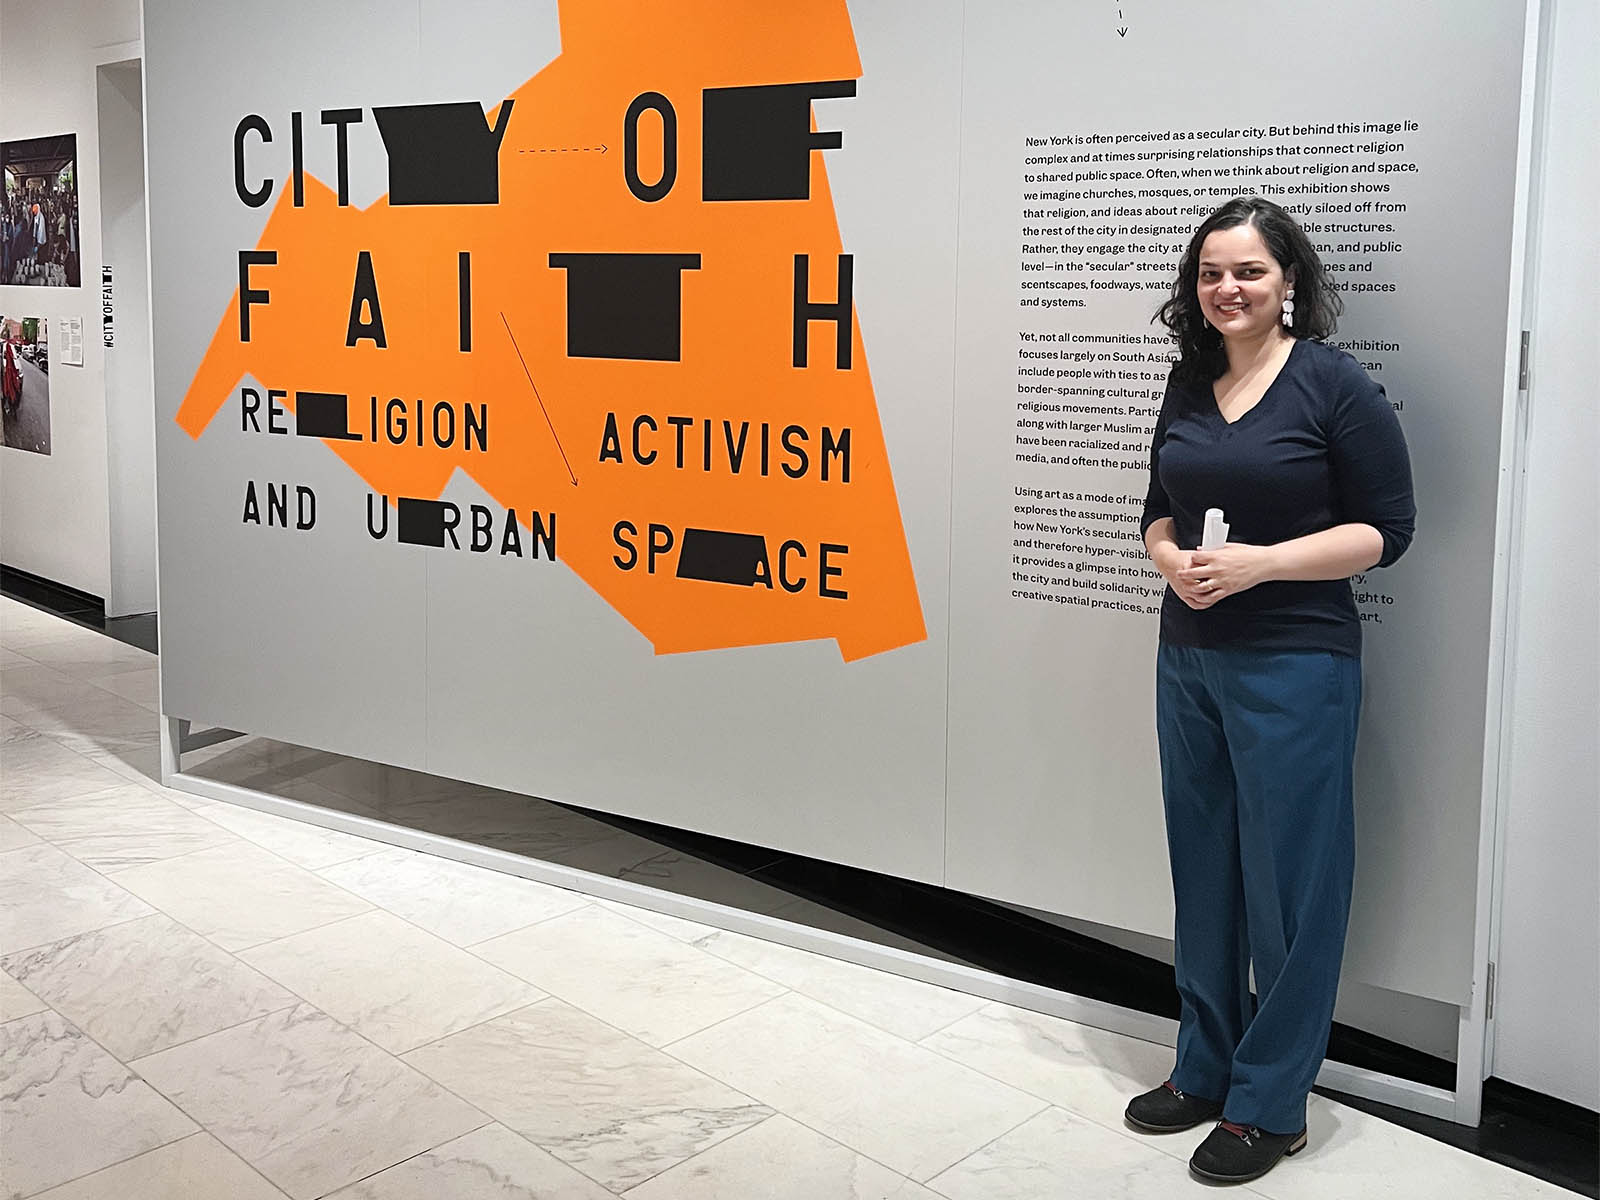 Curator Azra Dawood with the “City of Faith: Religion, Activism, and Urban Space" exhibit at the Museum of the City of New York. RNS photo by Kathryn Post